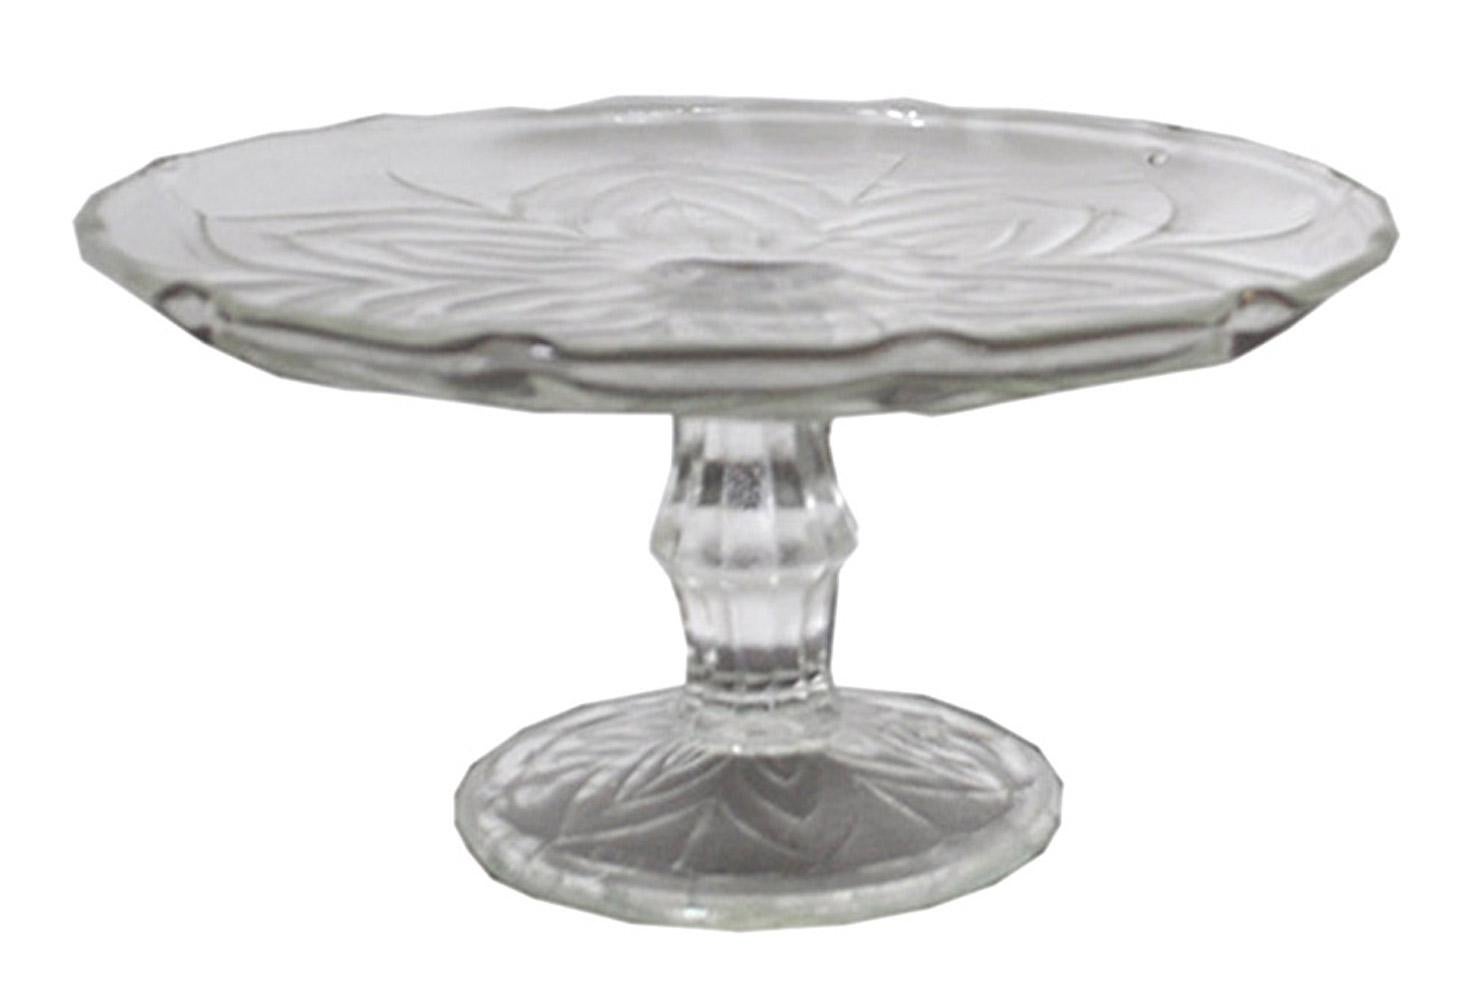 Antique glass pedestal dish ships from Europe
Antique glass cake stand salver.